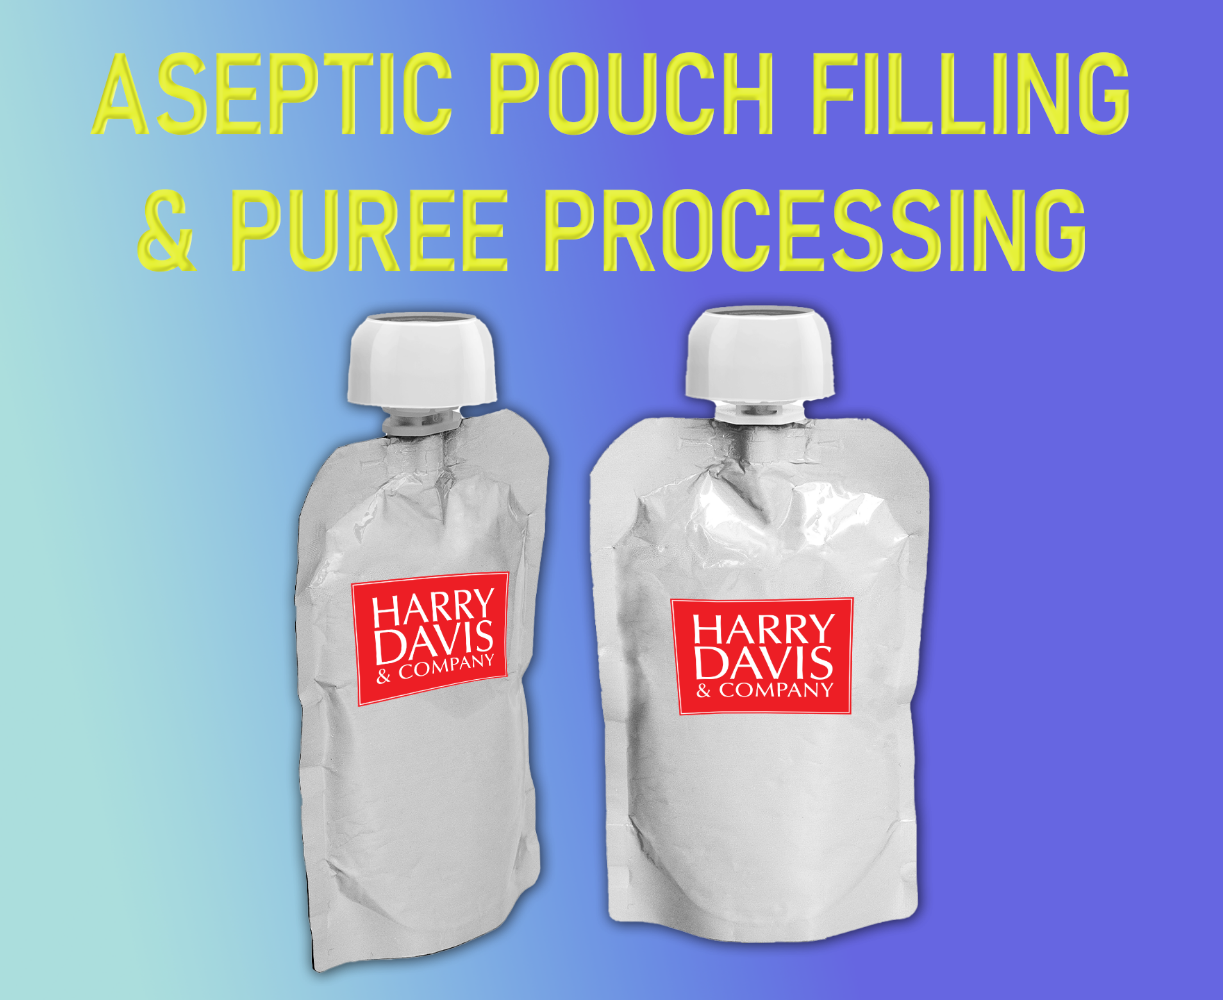 ASEPTIC Purees & Pouch Filling Equipment